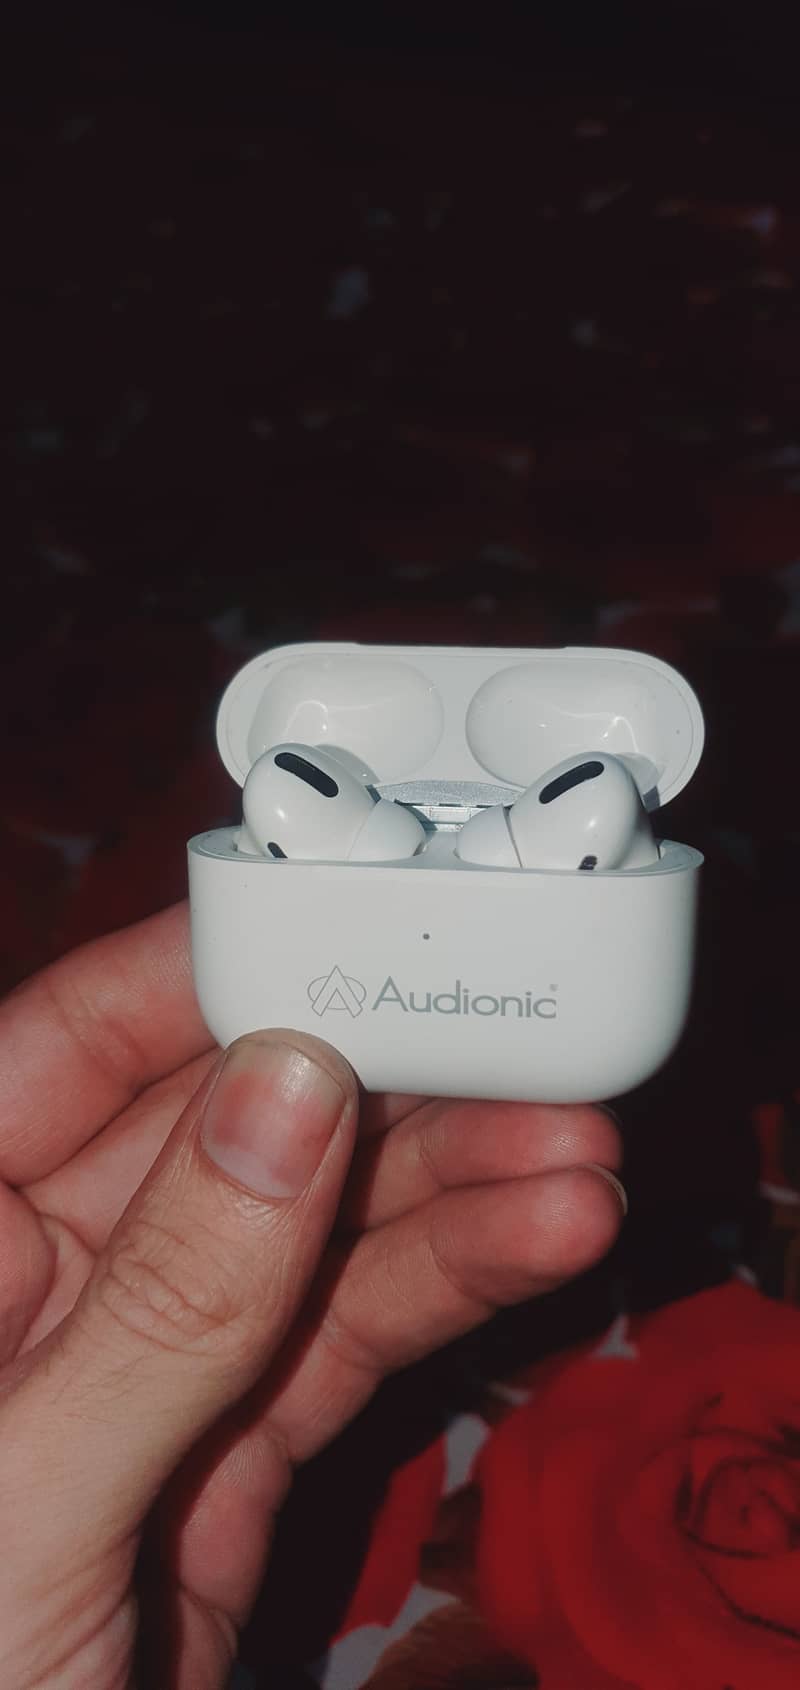 Audionic ear buds 10 by 10 cindition with box wilress charging suporte 2